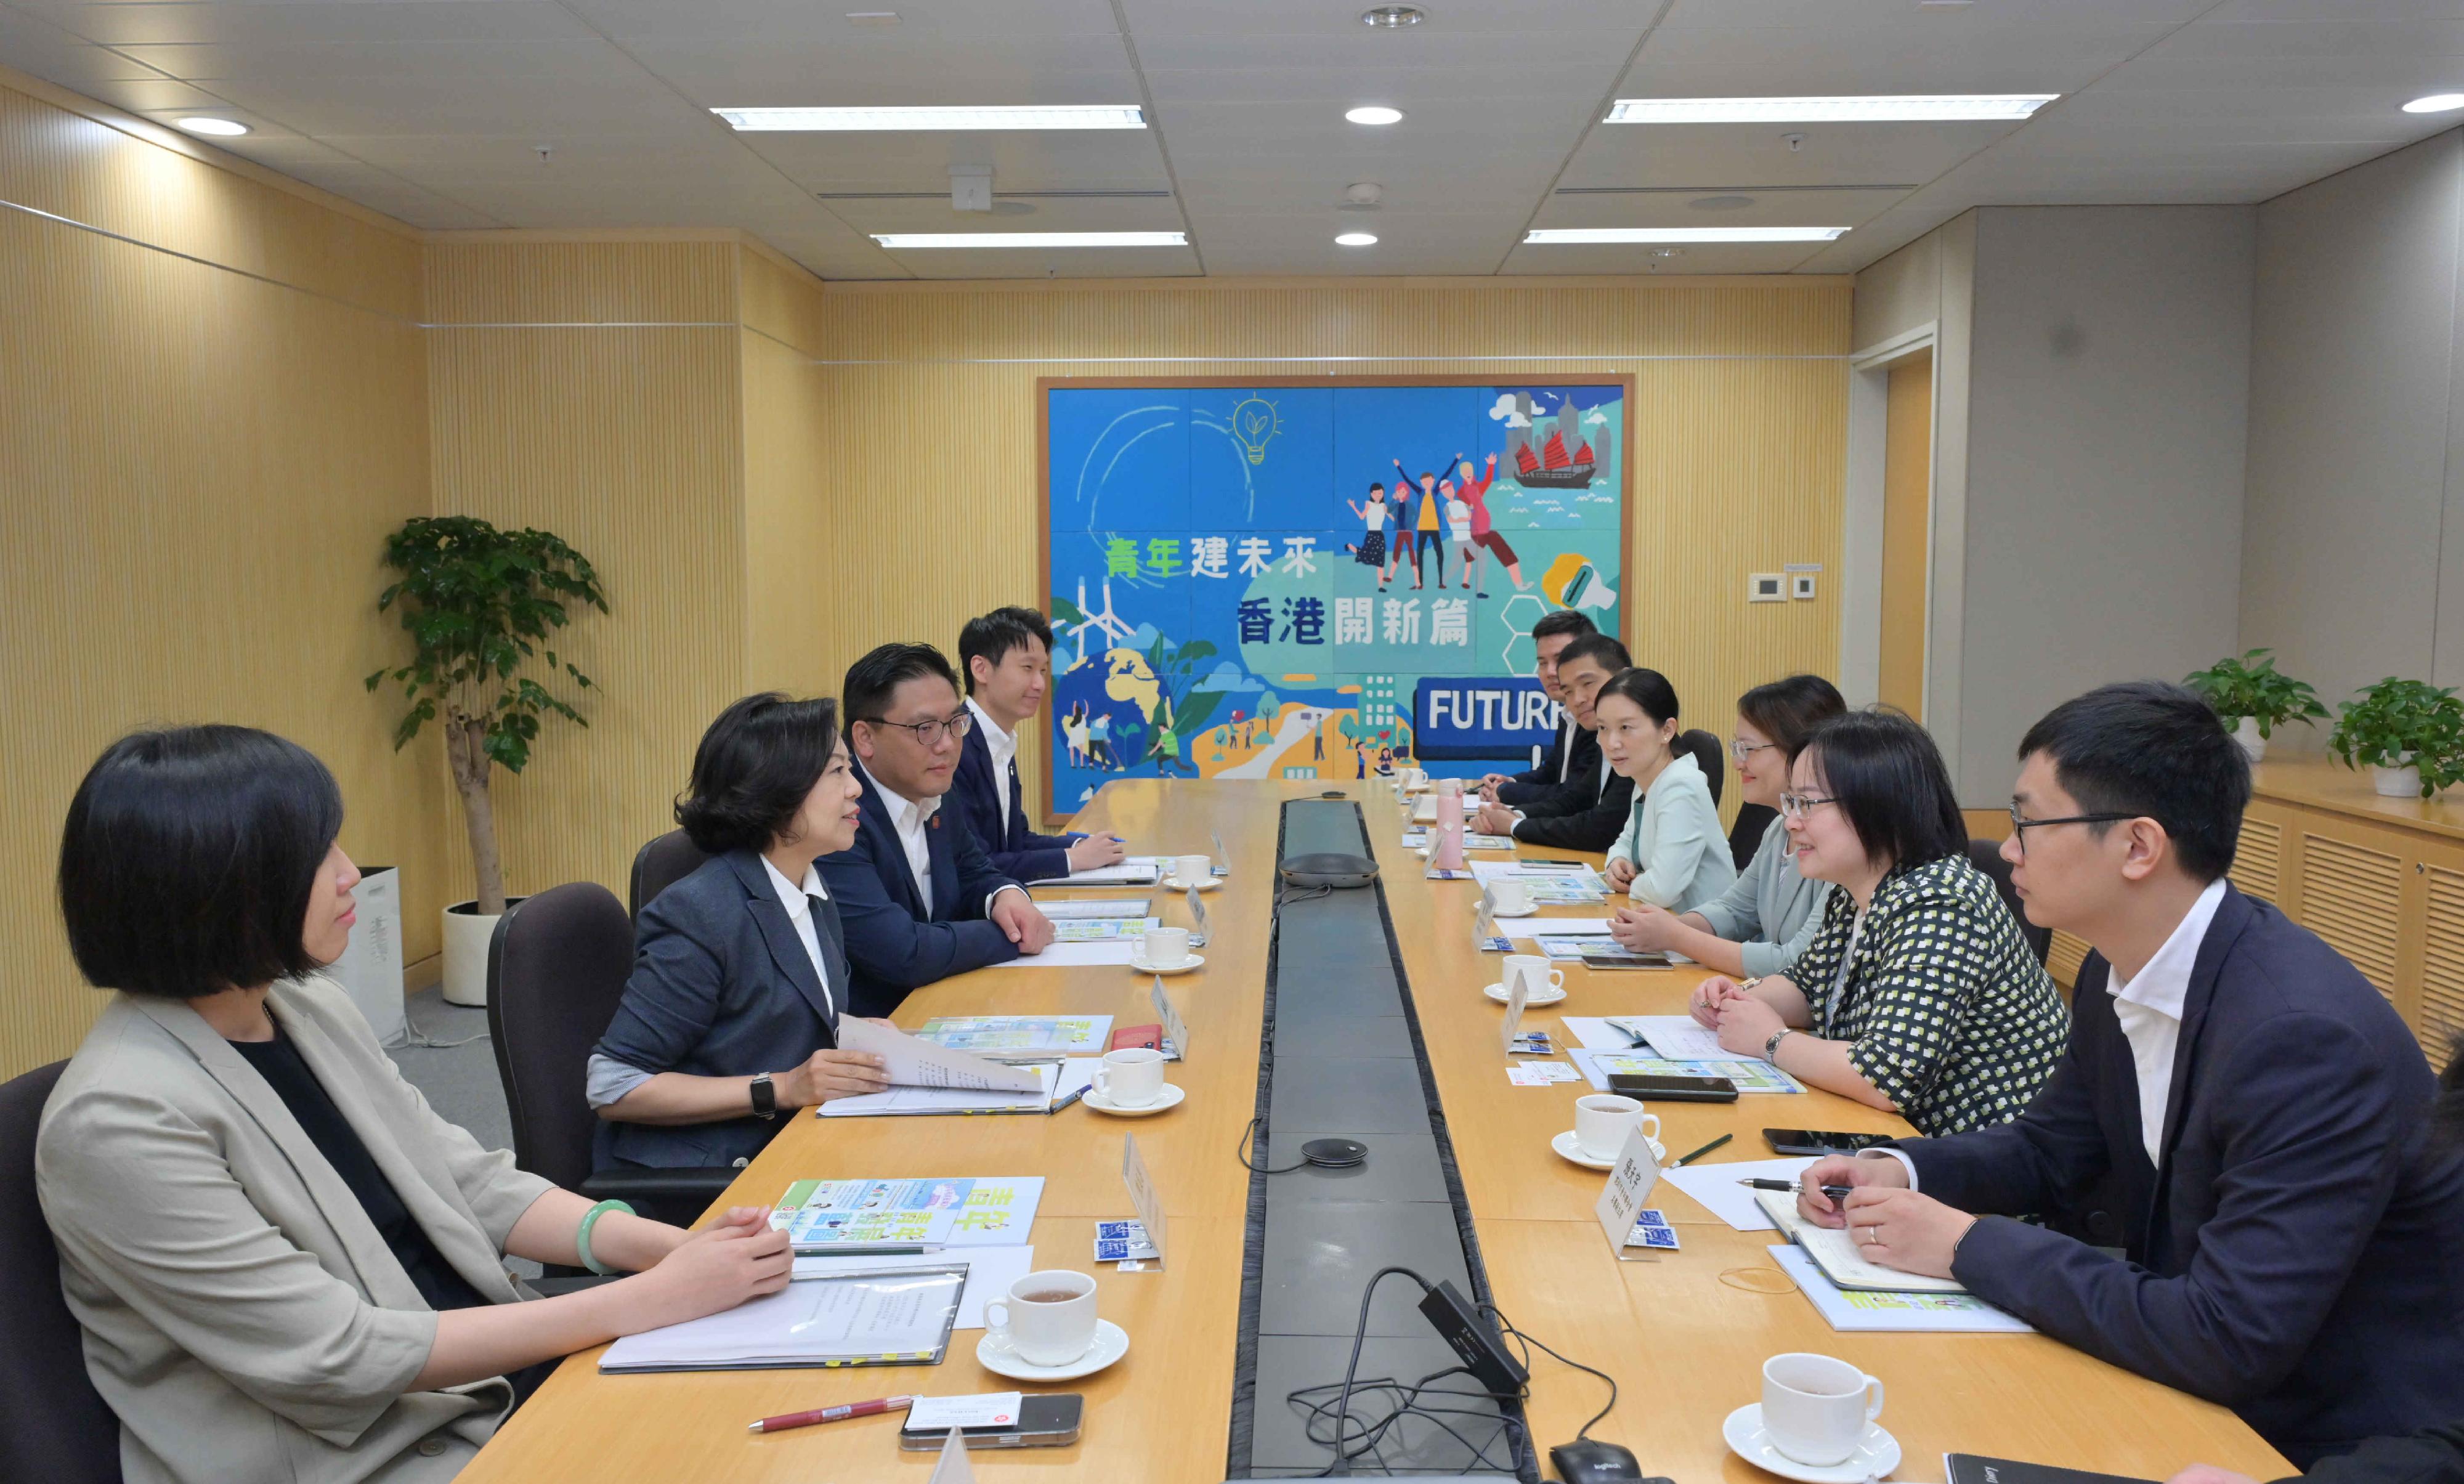 The Secretary for Home and Youth Affairs, Miss Alice Mak, today (August 1) met with representatives of the Guangdong Youth Federation and youth federations in relevant municipalities. Photo shows Miss Mak (second left) and the Under Secretary for Home and Youth Affairs, Mr Clarence Leung (third left), meeting with the person-in-charge of the Guangdong Youth Federation, Ms He Lulu (second right), and members of the delegation to share views on enhancing youth development and exchanges between Guangdong and Hong Kong.
